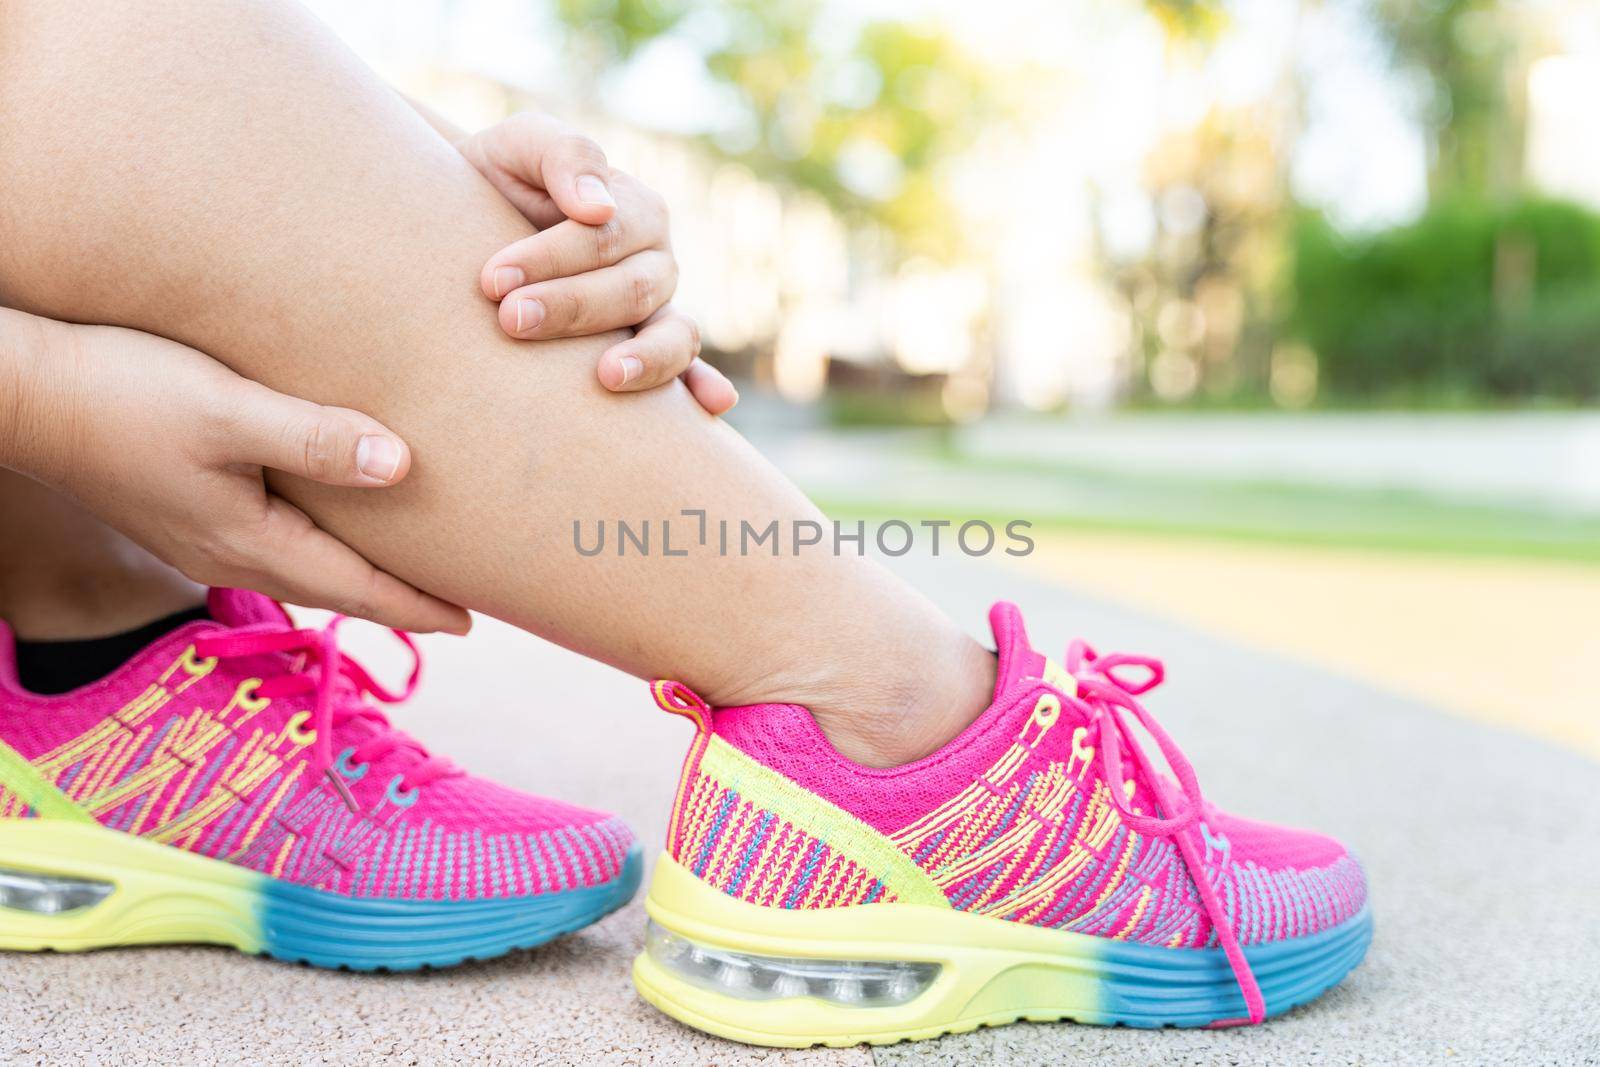 Female fatty runner athlete leg injury and pain. Hands grab painful leg while running in the park.